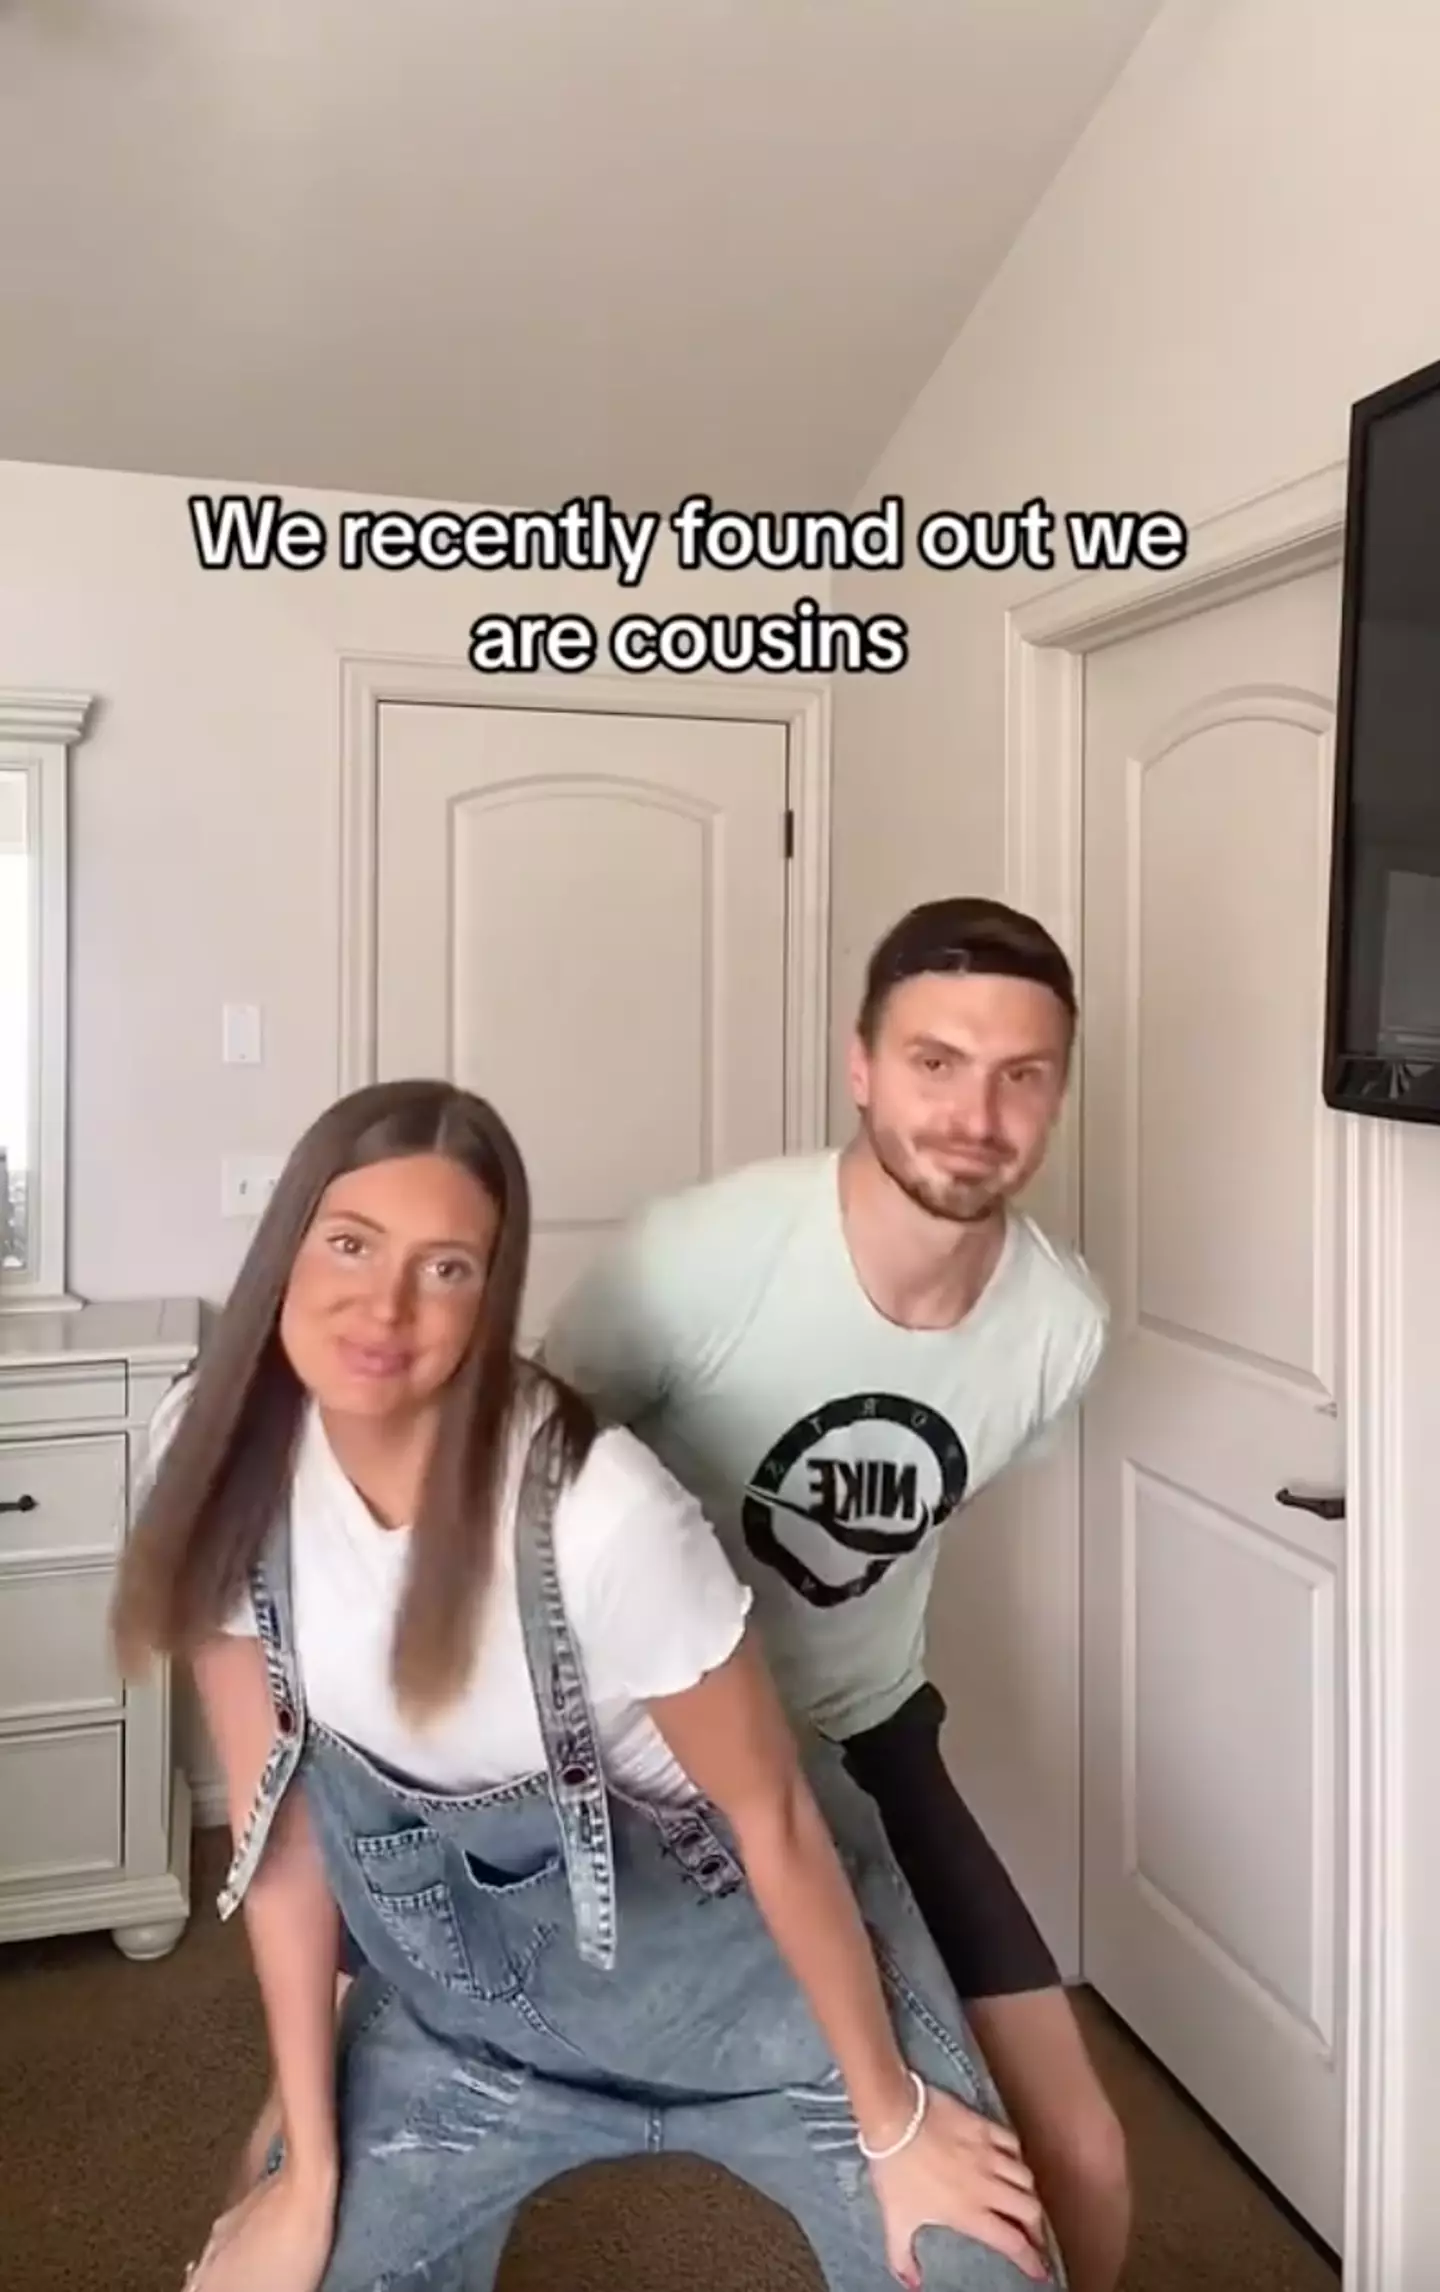 Nick and Tylee went viral for their realisation.